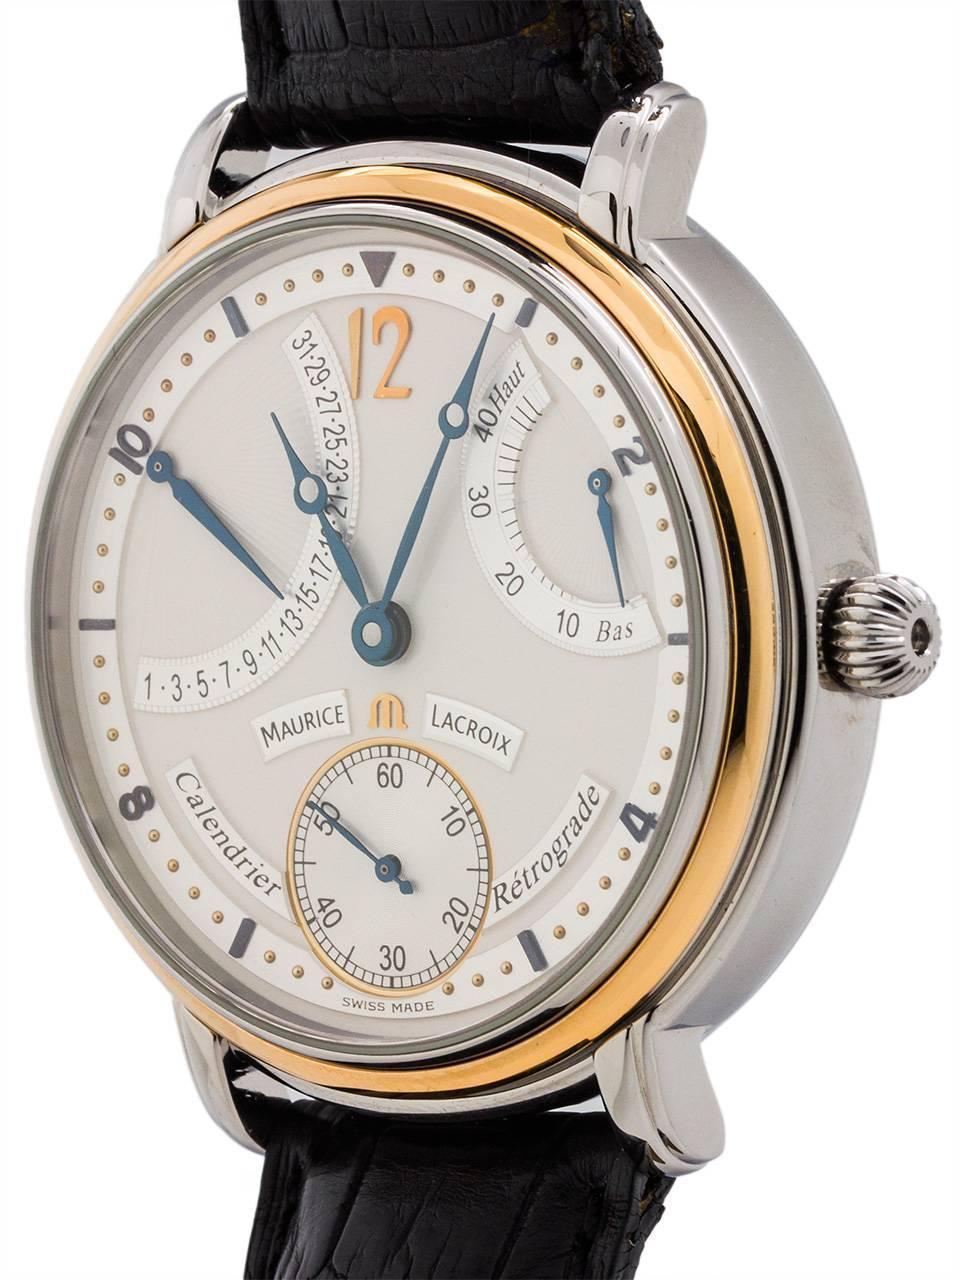 
Maurice LaCroix Masterpiece Calendrier Retrograde ref mp6198-ss001-191. Large and elegant dress model circa 2000’s. Featuring a 43mm stainless steel case with white dial, and guilloche power reserve and retrograde date indicators. Power reserve